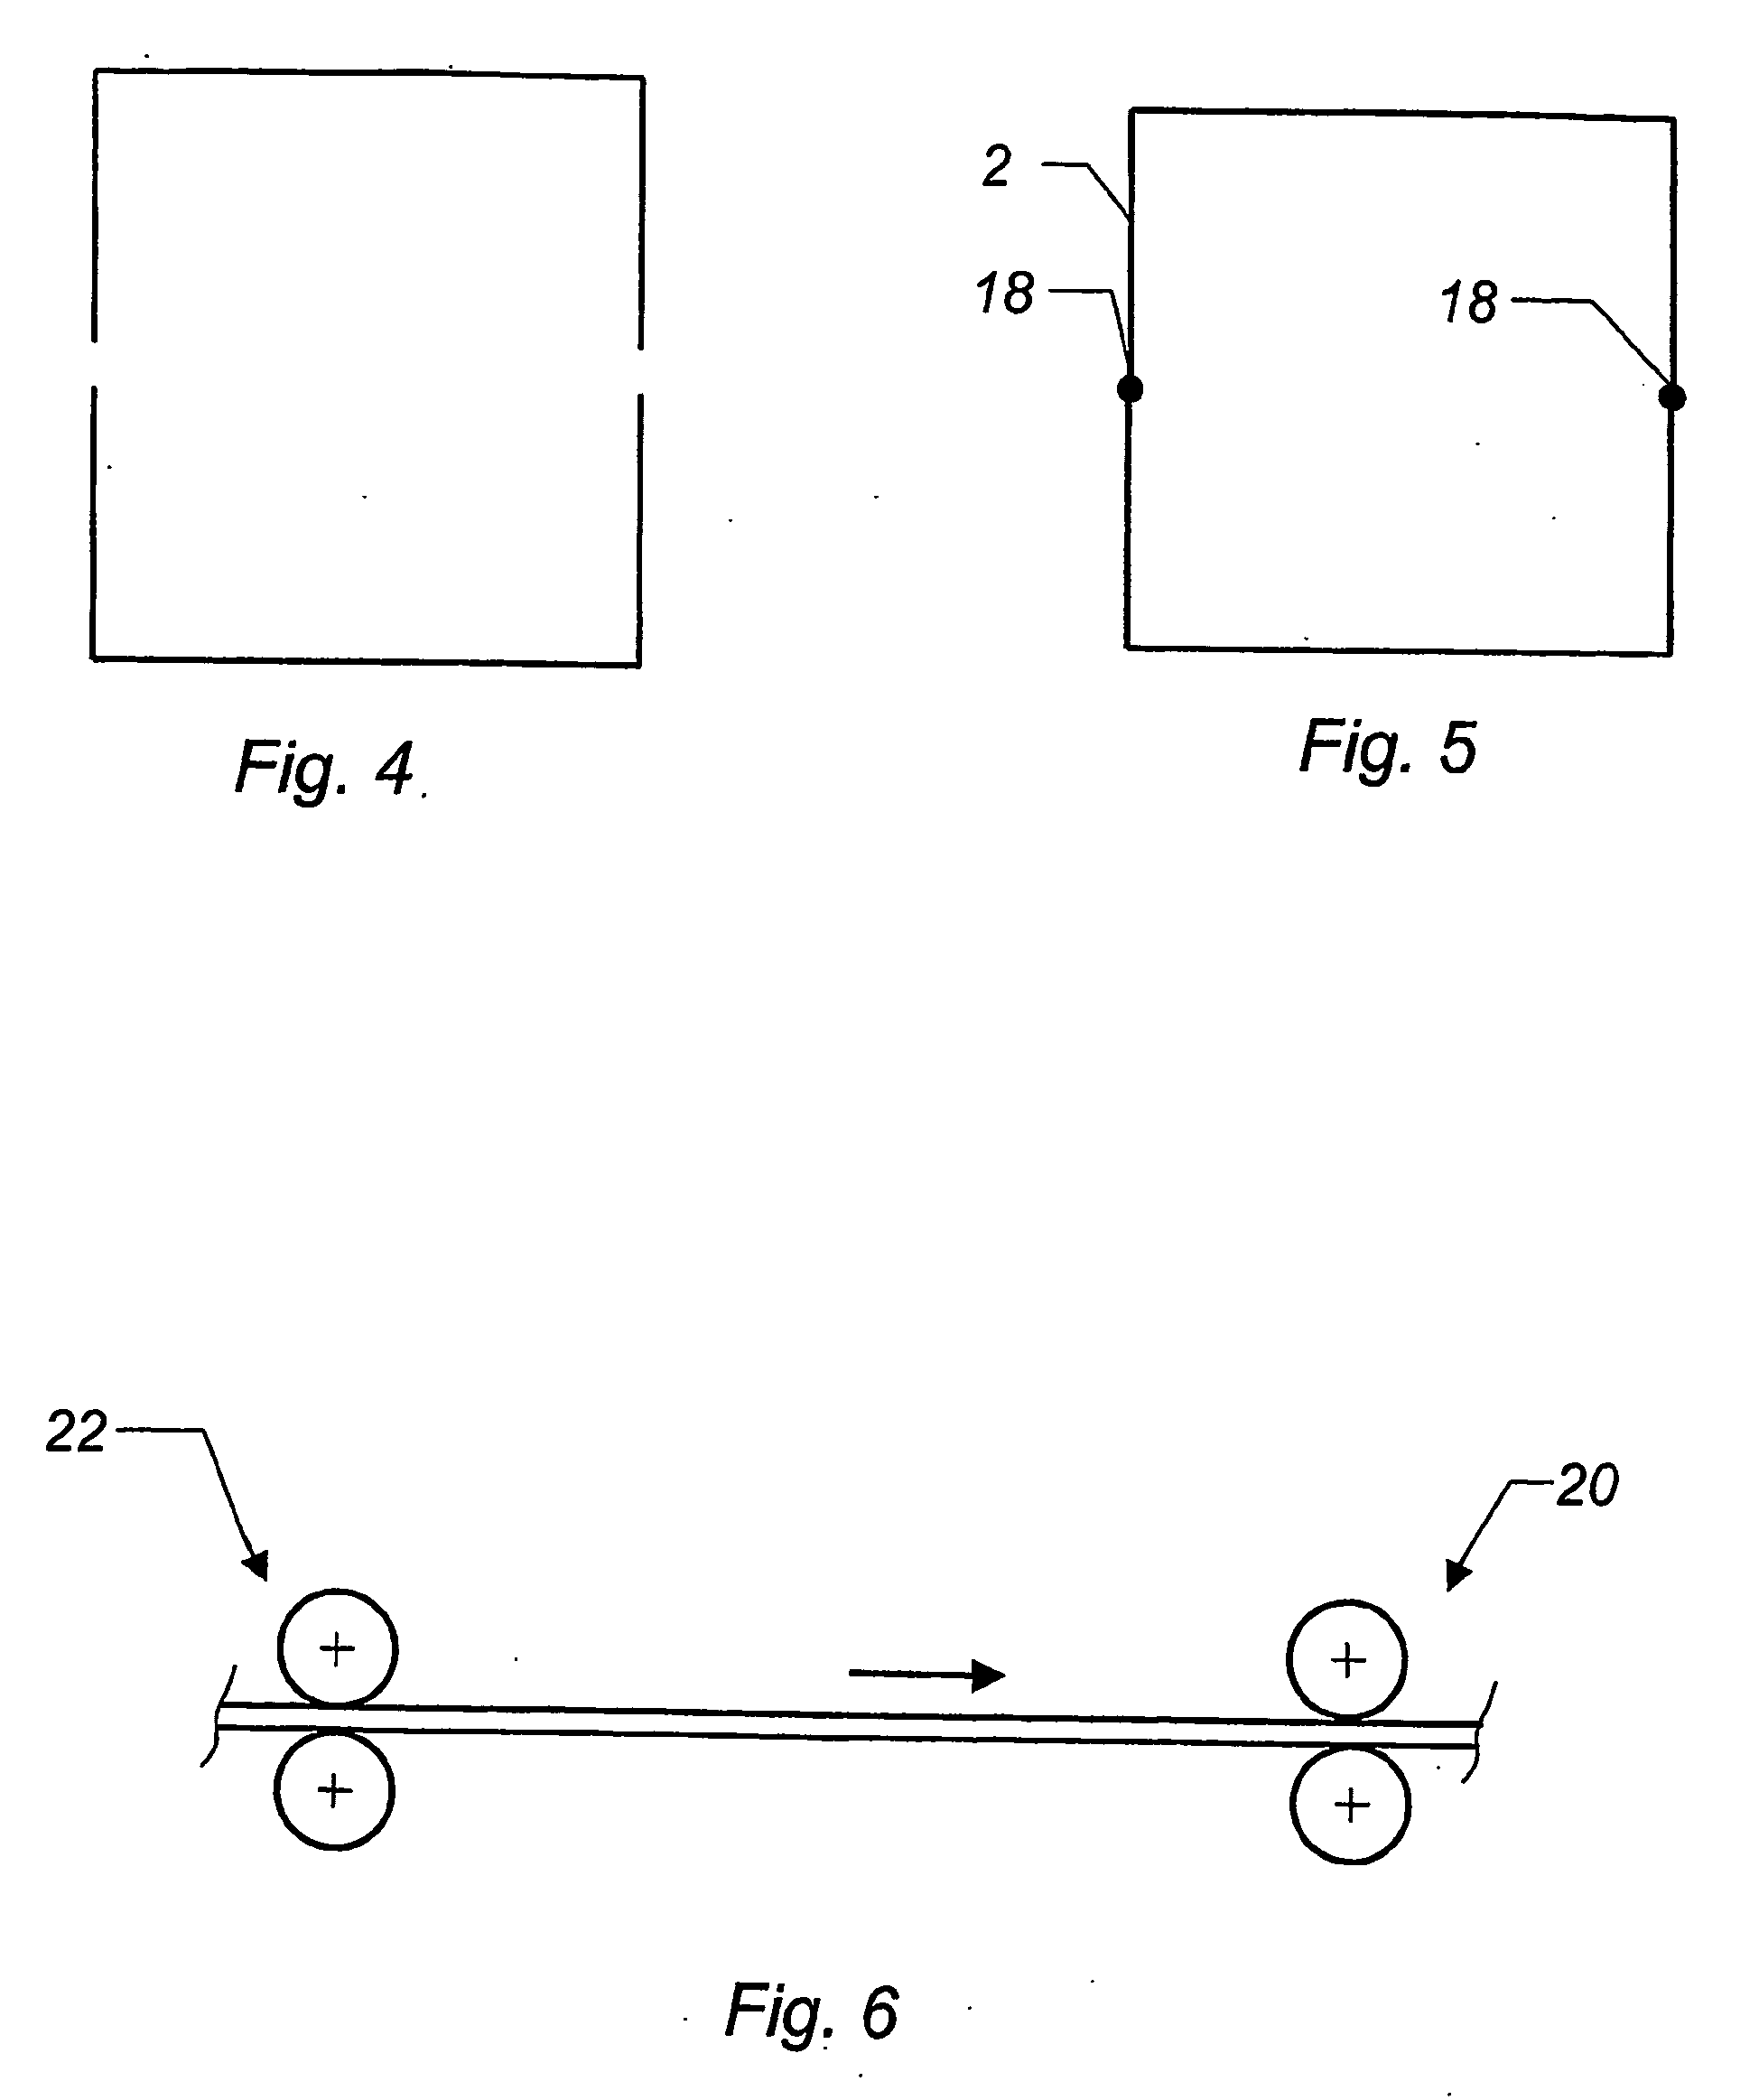 Method, use and device relating to nuclear light water reactors